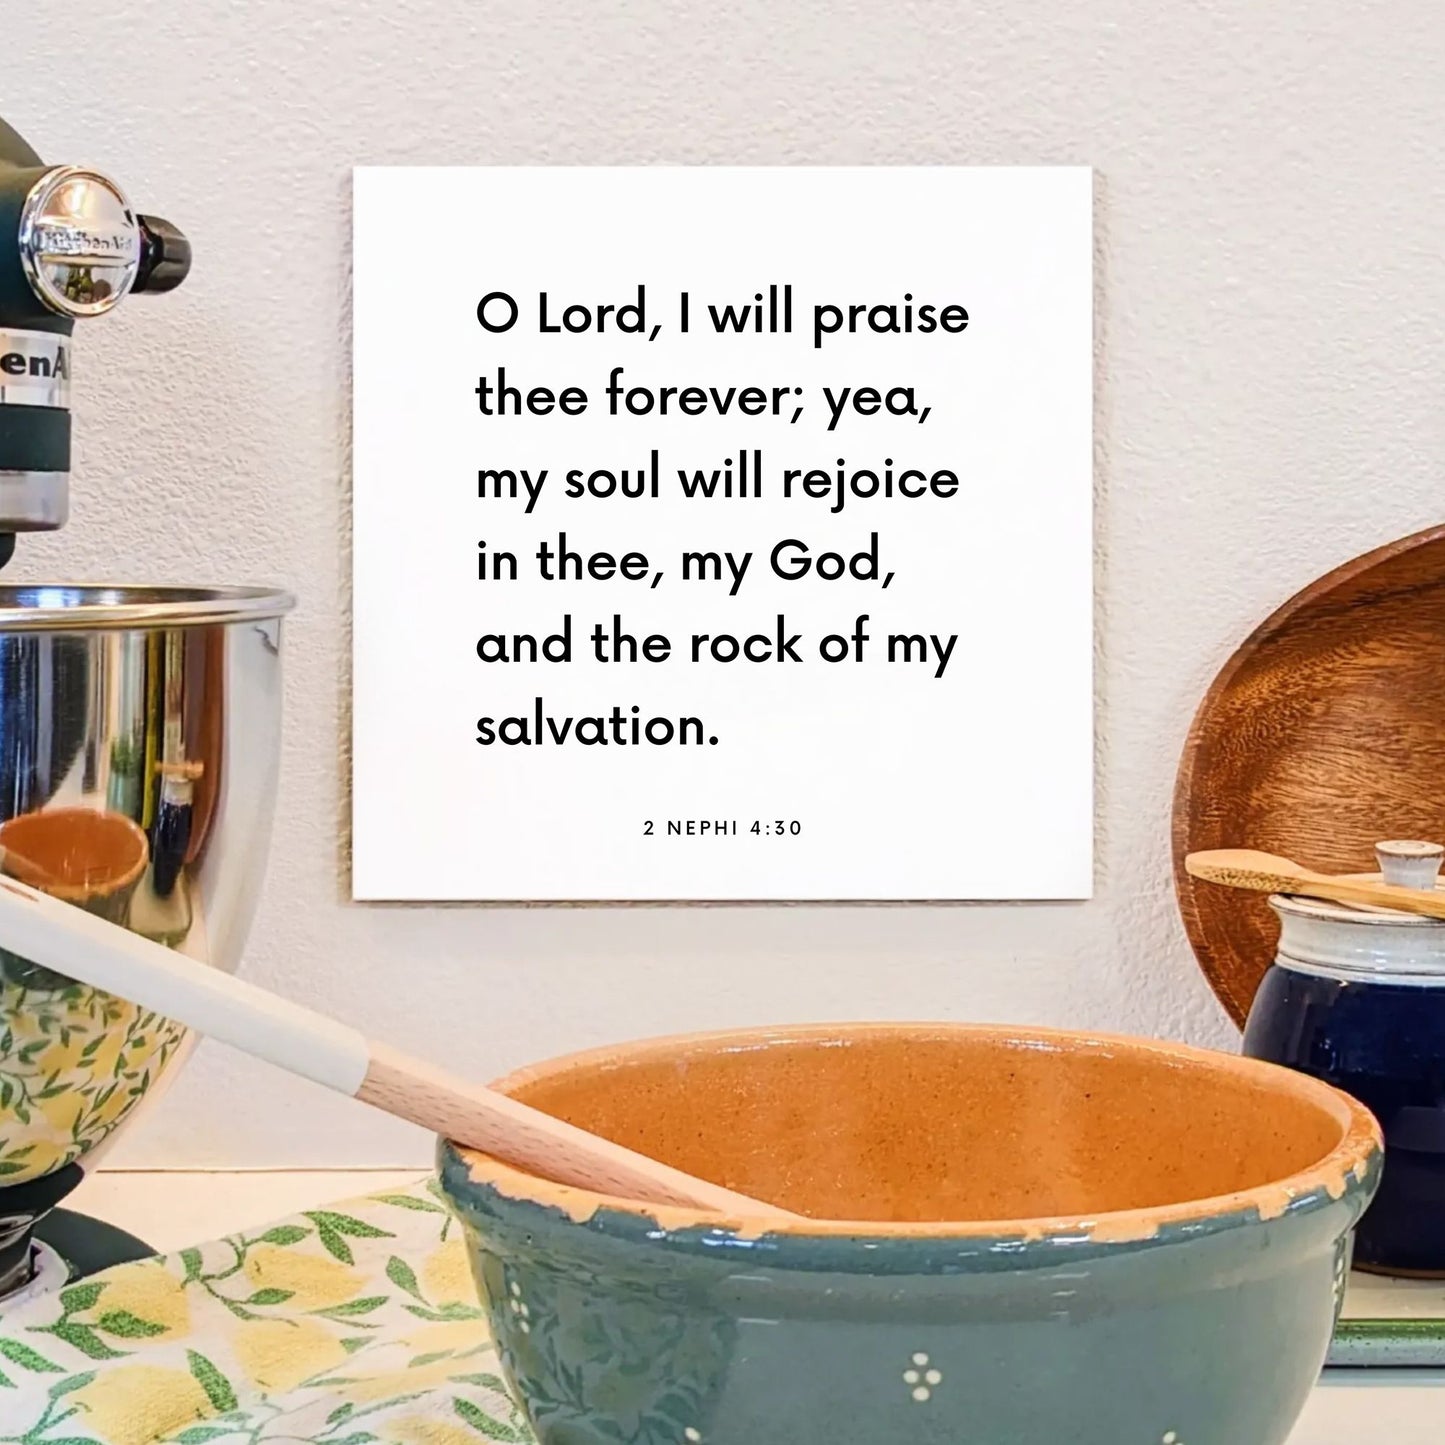 Kitchen mouting of the scripture tile for 2 Nephi 4:30 - "Lord, I will praise thee forever"